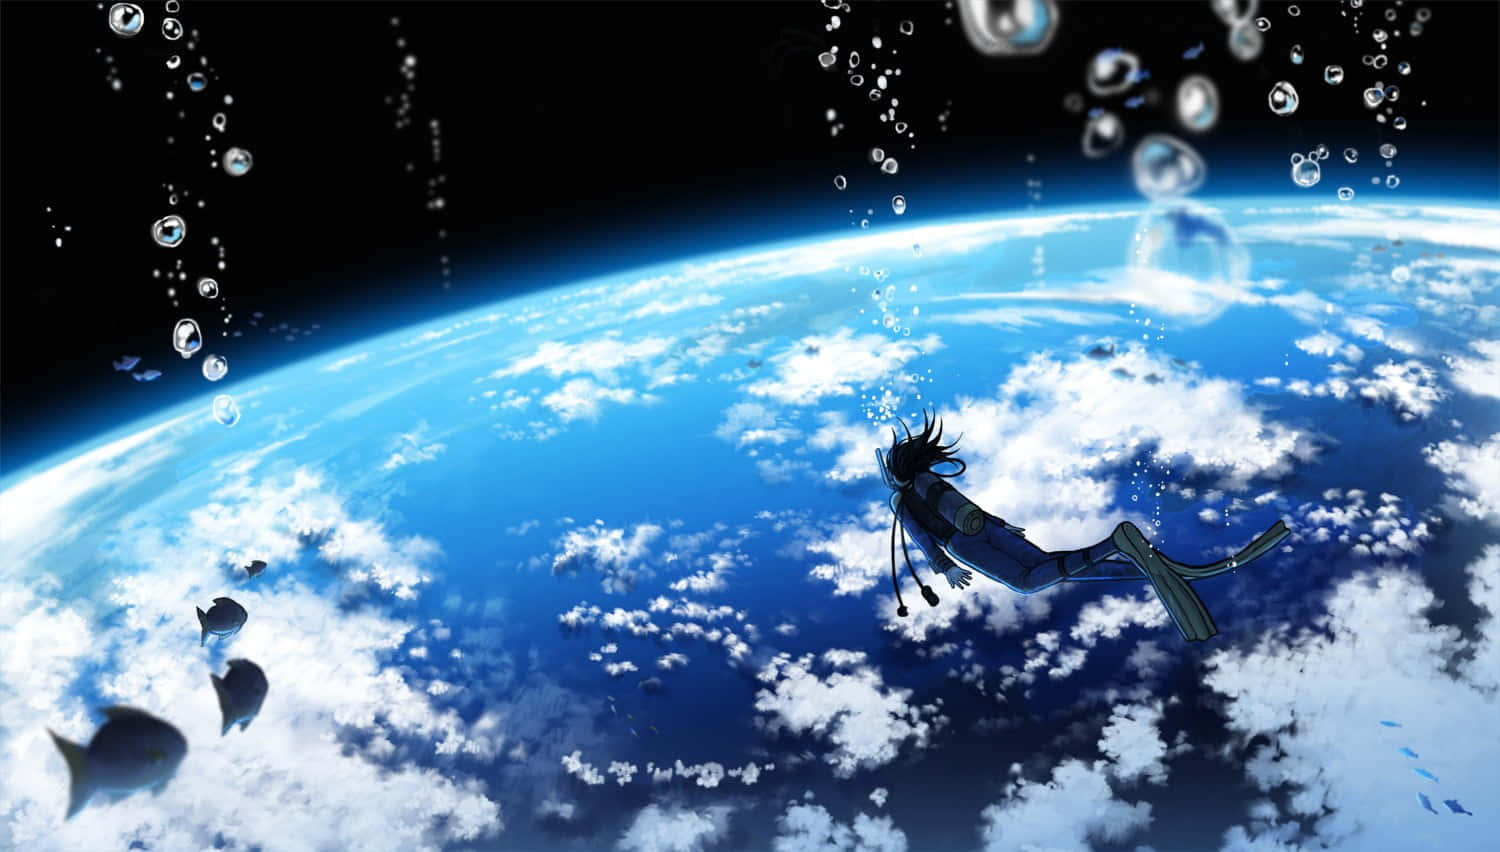 Scuba Diving On Earth With Bubble Anime Wallpaper